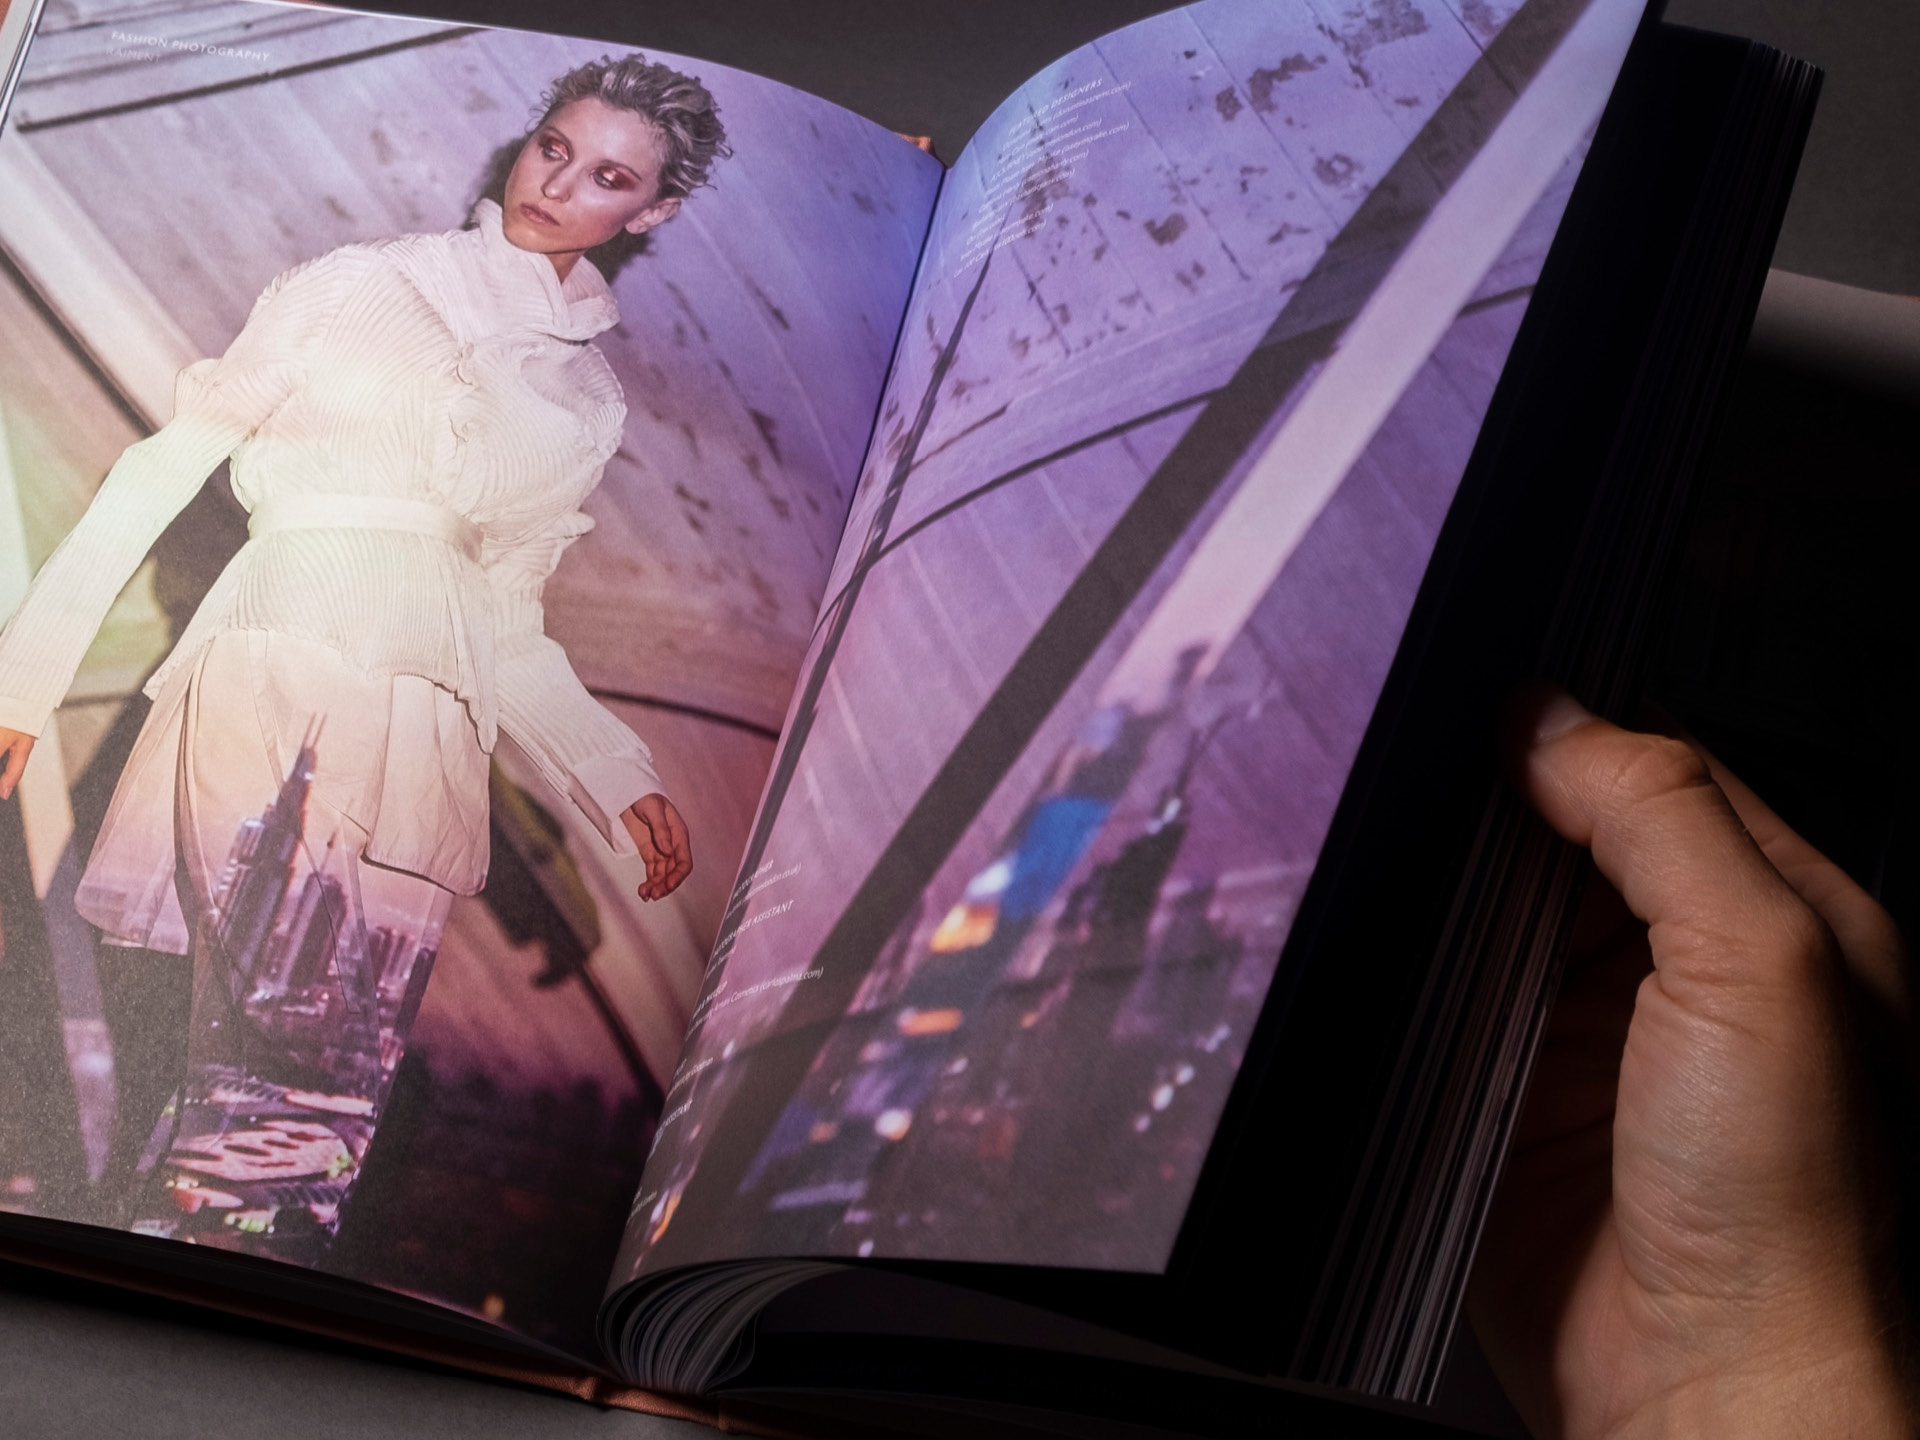 Printed spread from the Accouter Four annual showcasing one of the images of a model with a skyline projected across her body